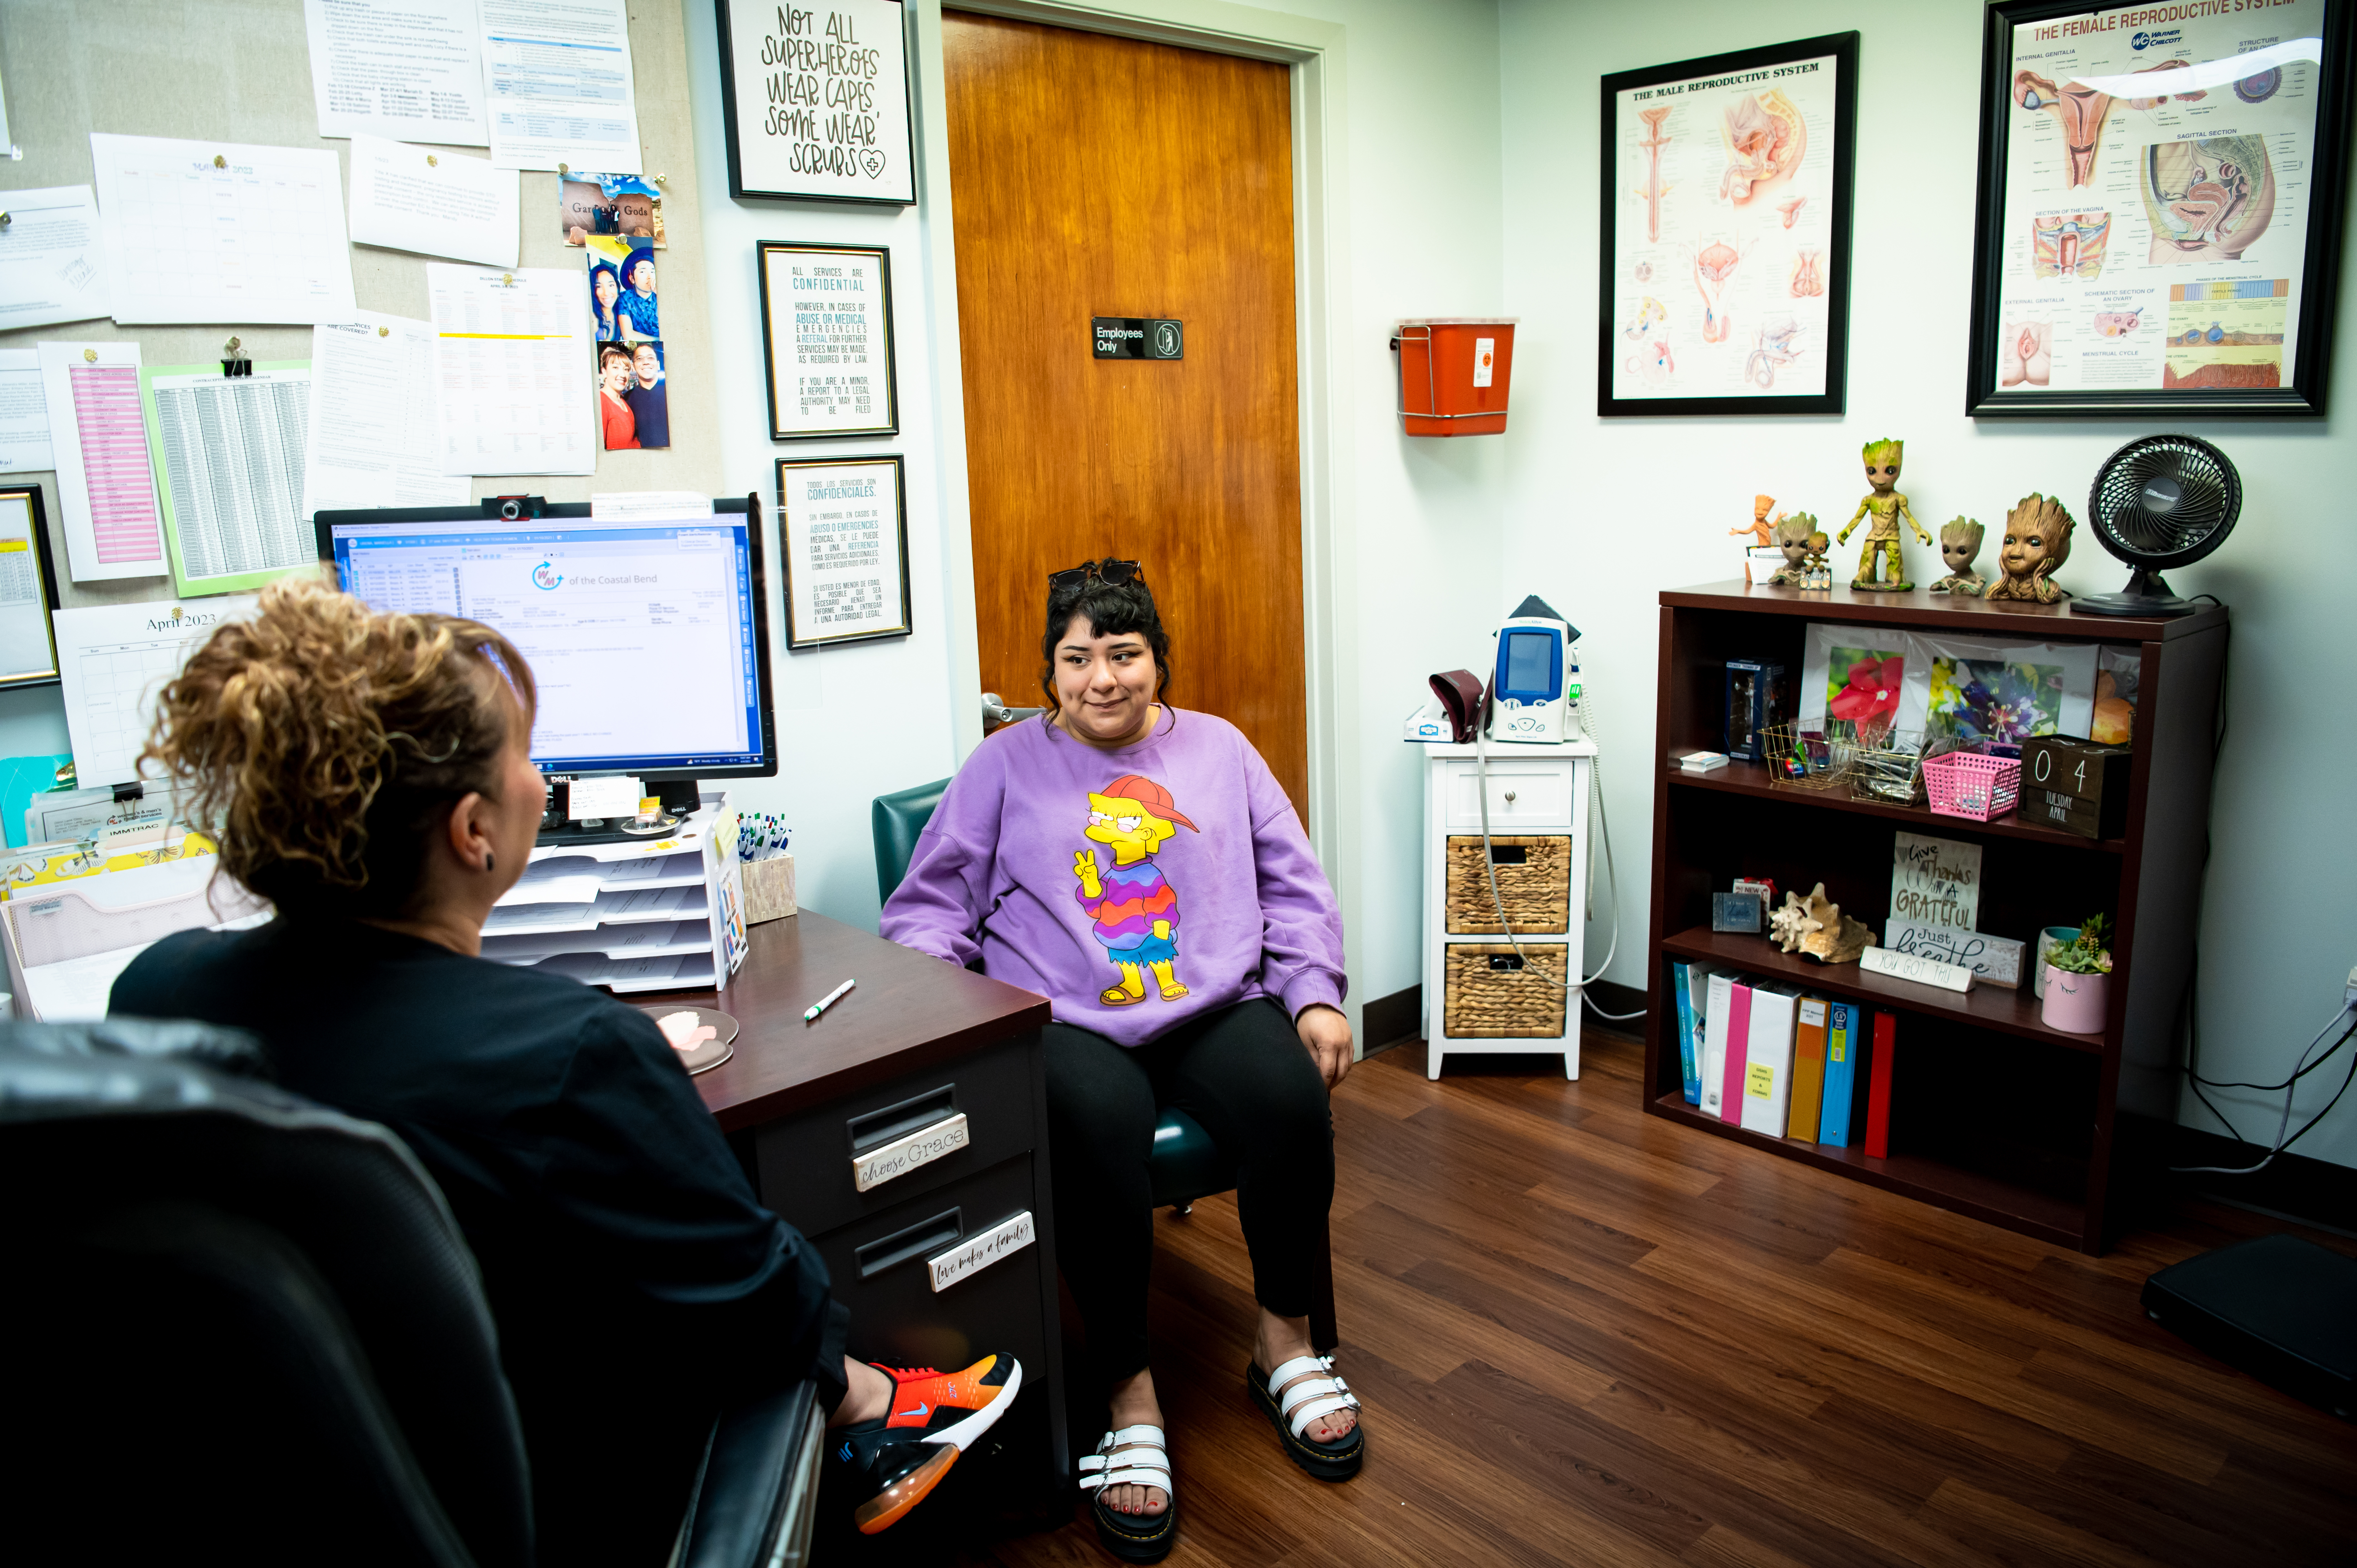 CORPUS CHRISTI, TEXAS - APRIL 4, 2023: Clinic Supervisor, Yvette Herrera, advises Mariella Ureña, 27, about birth control options, during a consultation at Women’s & Men’s Health Services of the Coastal Bend, in Corpus Christi. Ms. Ureña works full-time as a nurse aide - she makes $12/hour and cannot afford to have children, nor to pay for birth control, she said. She is thankful to be eligible for free birth control and health services at the clinic through Healthy Texas Women - the state’s largest safety net program, that serves thousands of women each year. Family planning clinics across the state rely on HTW funding to care for patients who can’t afford core services such as annual exams, STI screenings, HIV testing, contraception, pregnancy testing, cancer screenings, and more. PHOTO: Meridith Kohut for The Texas Observer